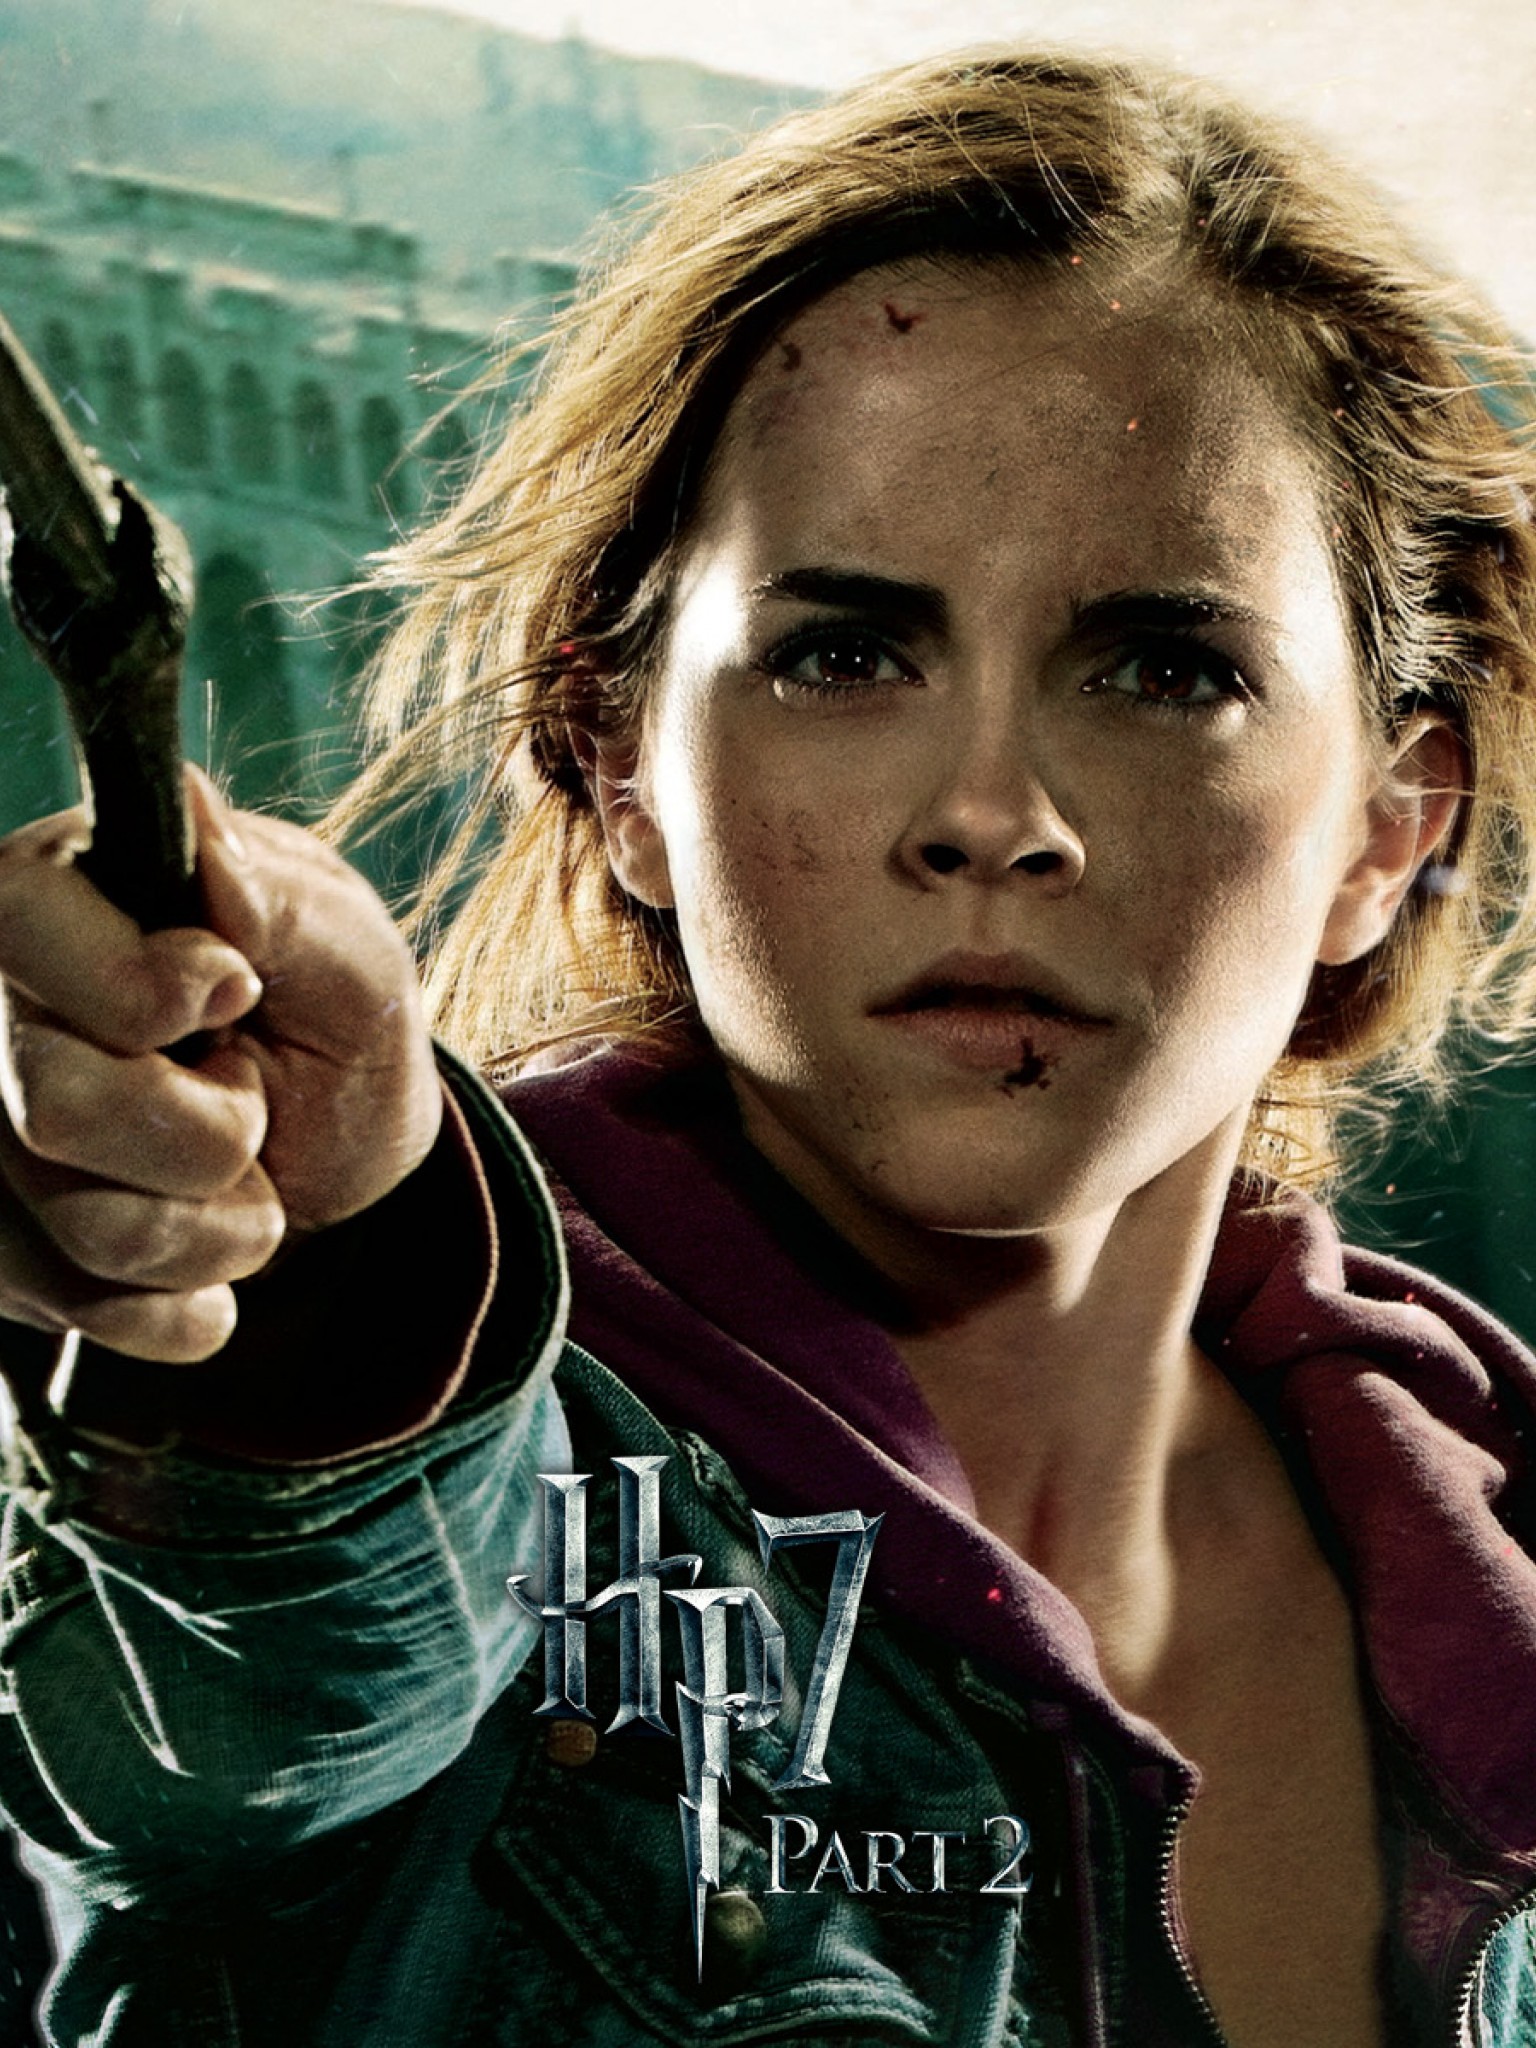 Free Emma Watson in The Deathly Hallows Part 2 Wallpaper for Desktop and Mobiles